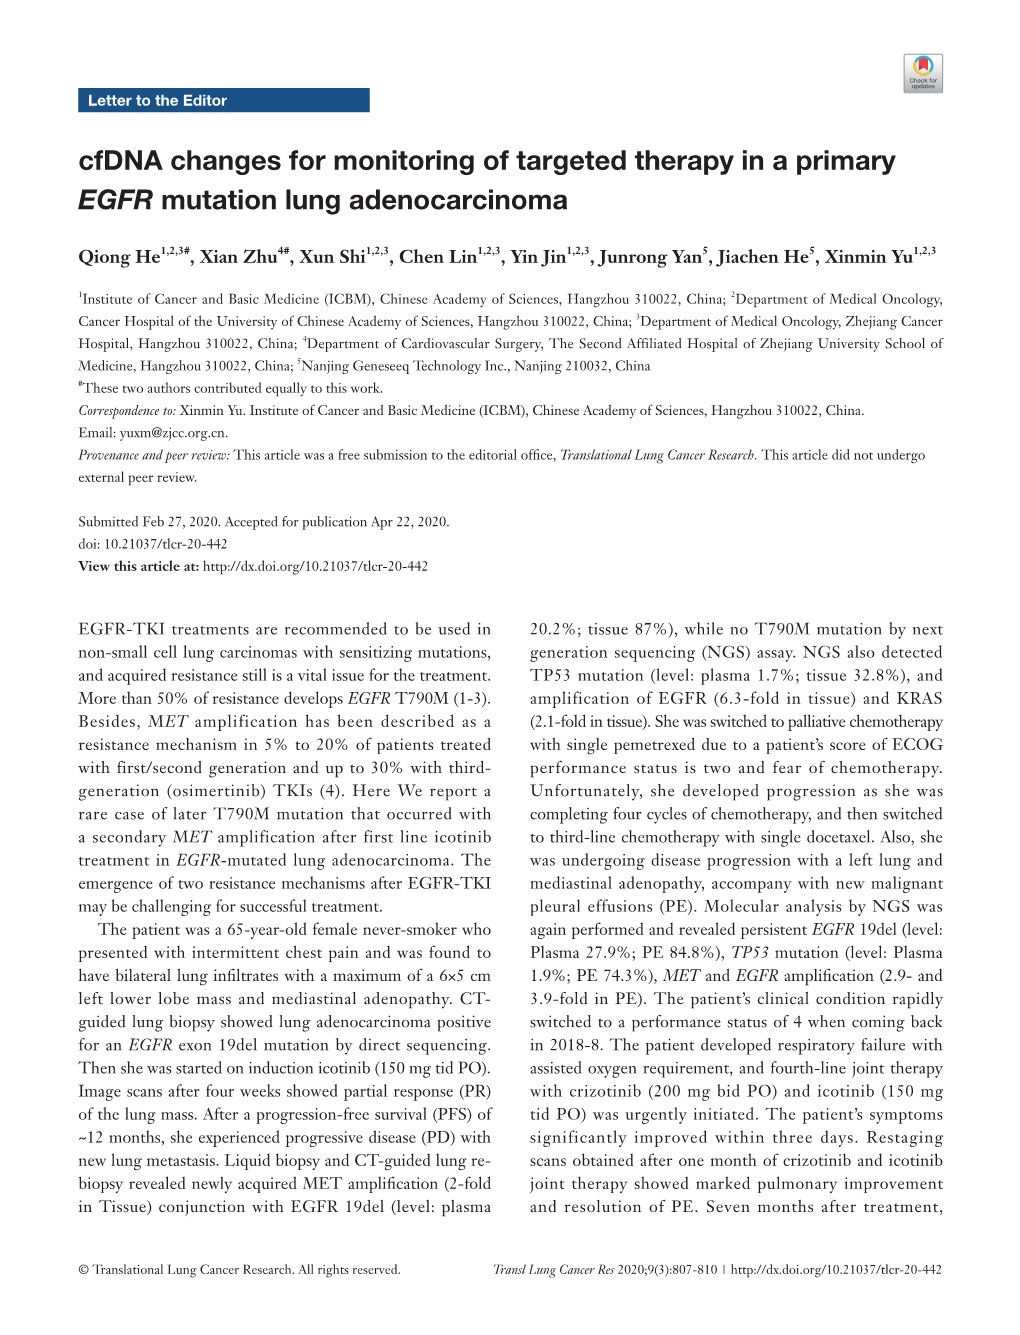 Cfdna Changes for Monitoring of Targeted Therapy in a Primary EGFR Mutation Lung Adenocarcinoma